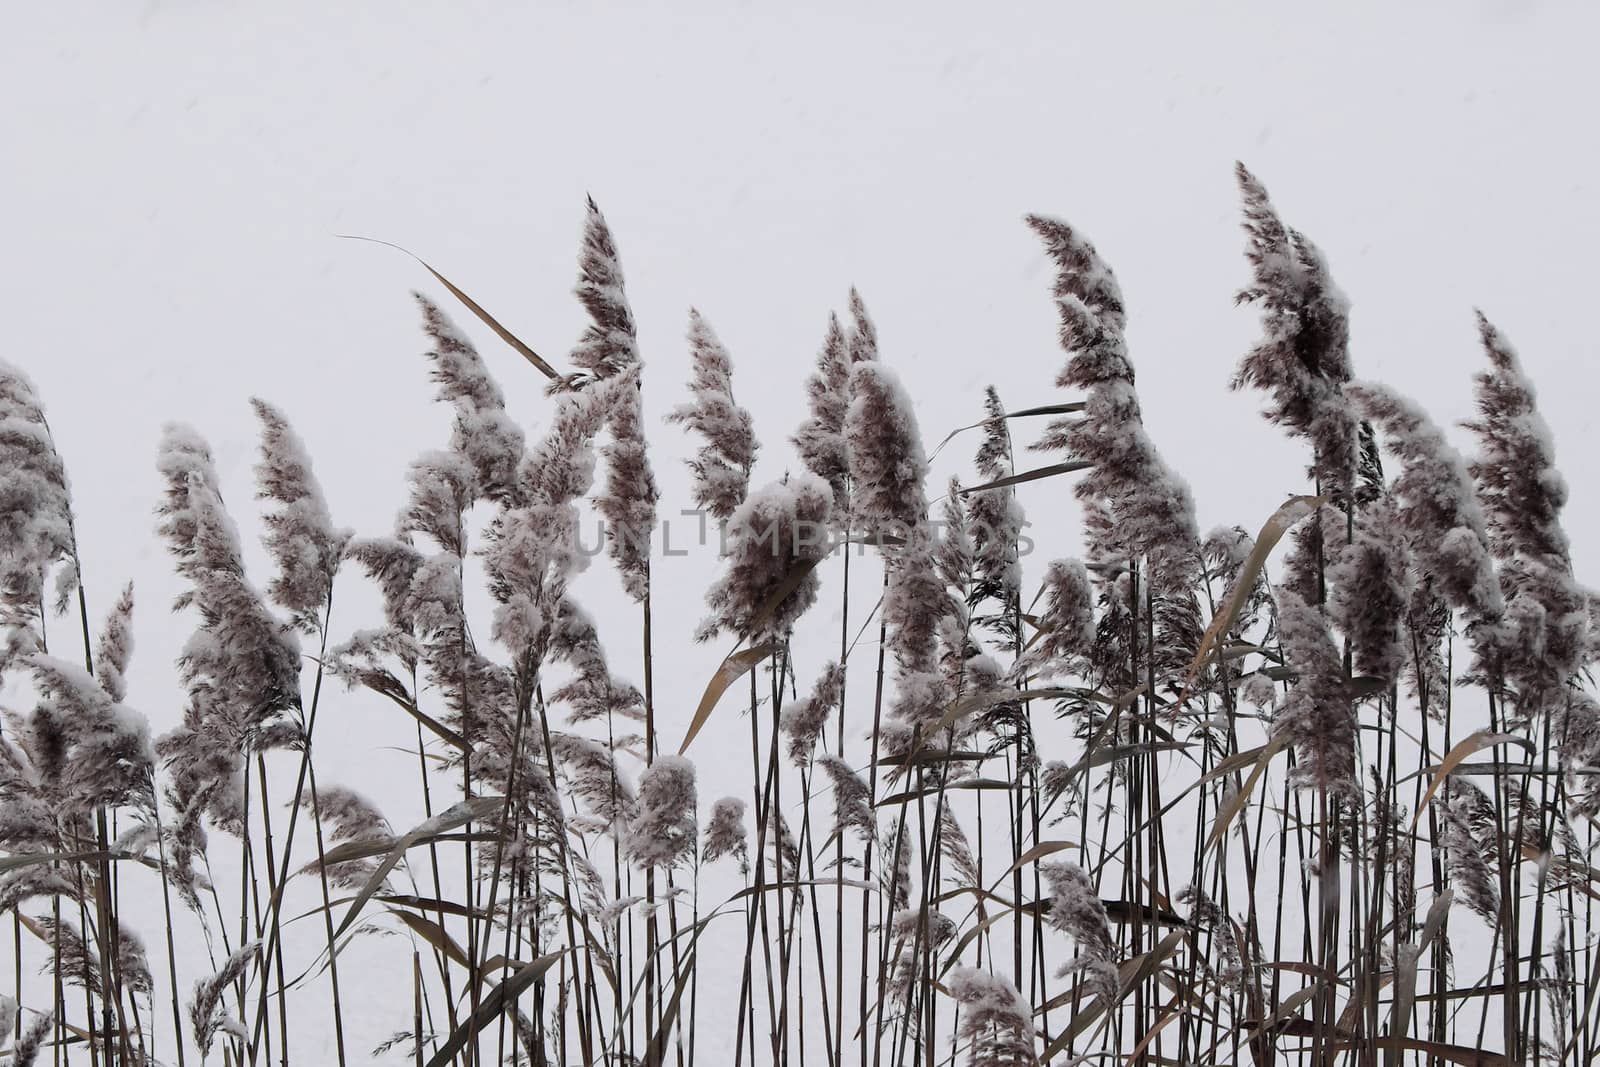 Winter. Cane on white background covered with fluffy snow